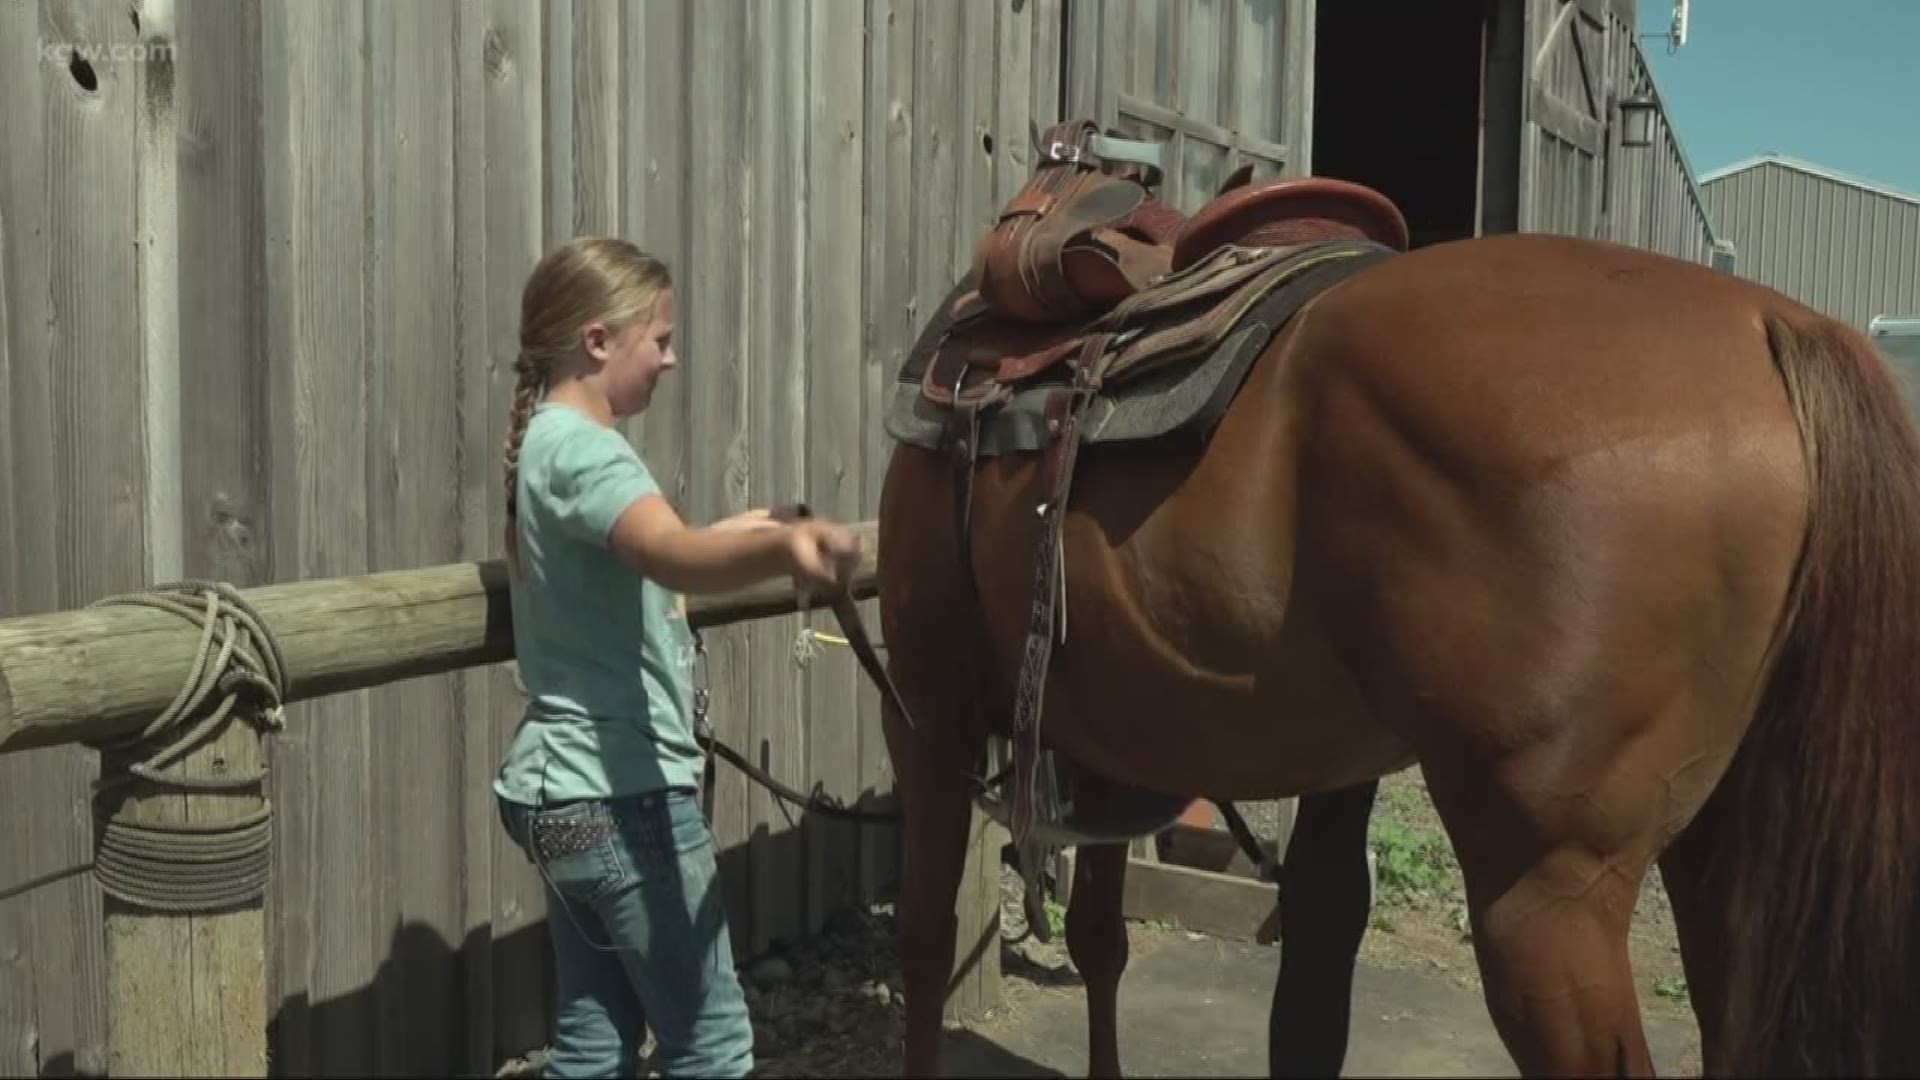 A 10-year-old horse trainer received the gift of a lifetime.

Local, animal